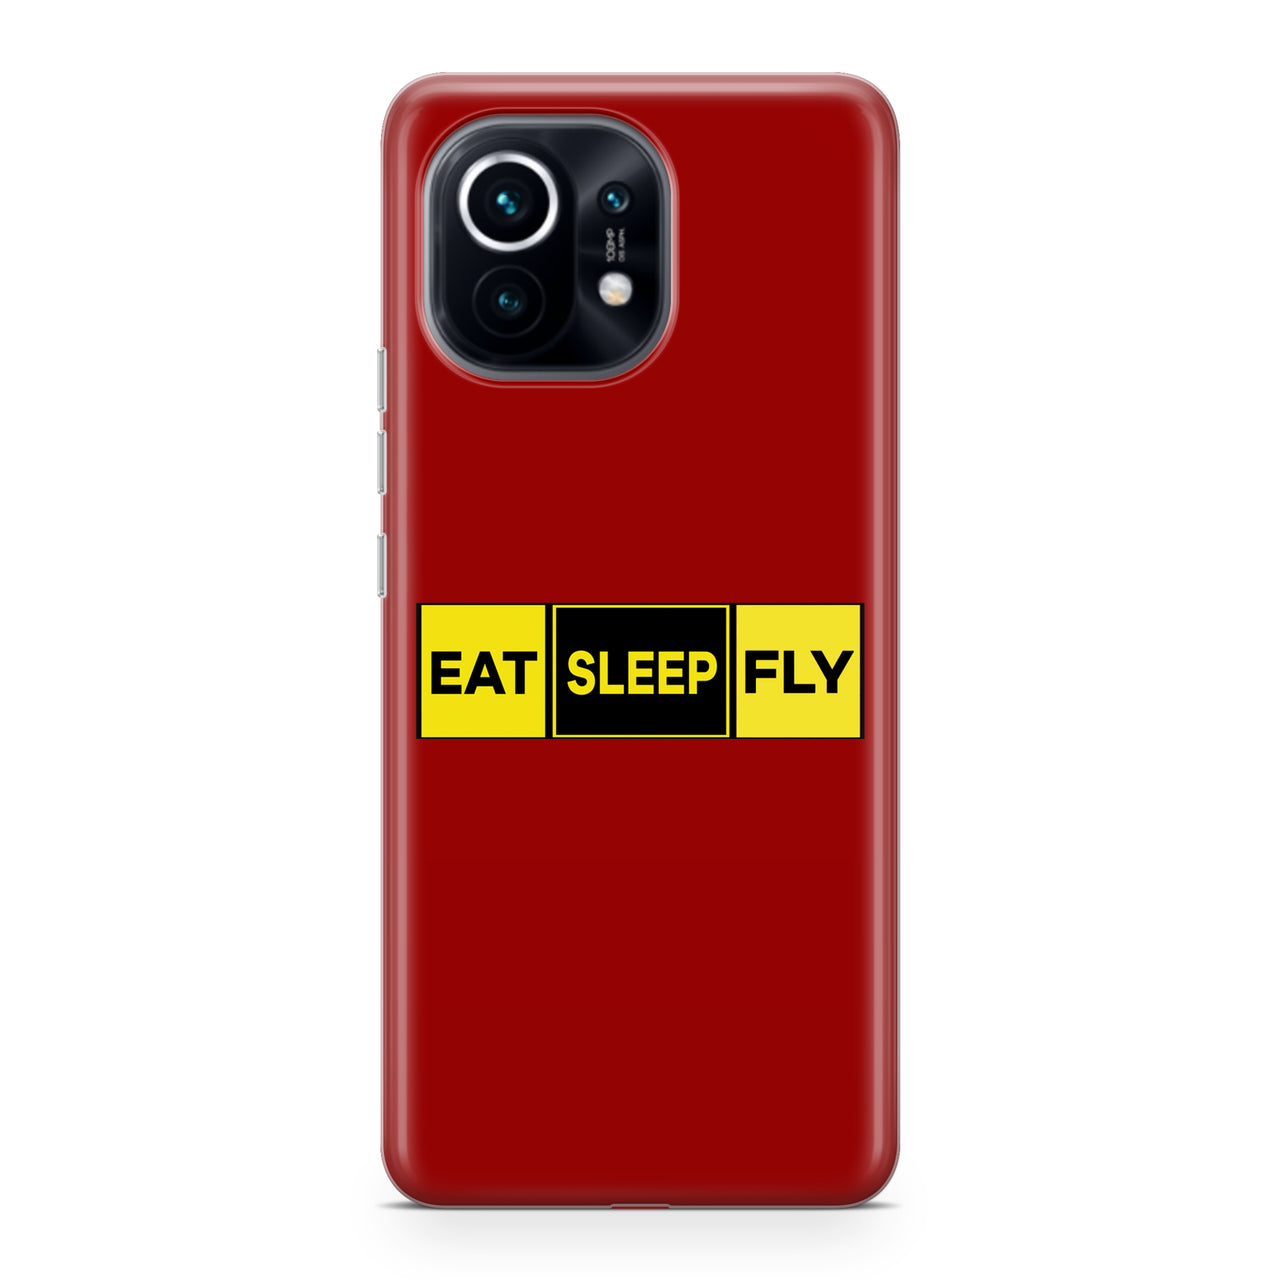 Eat Sleep Fly (Colourful) Designed Xiaomi Cases